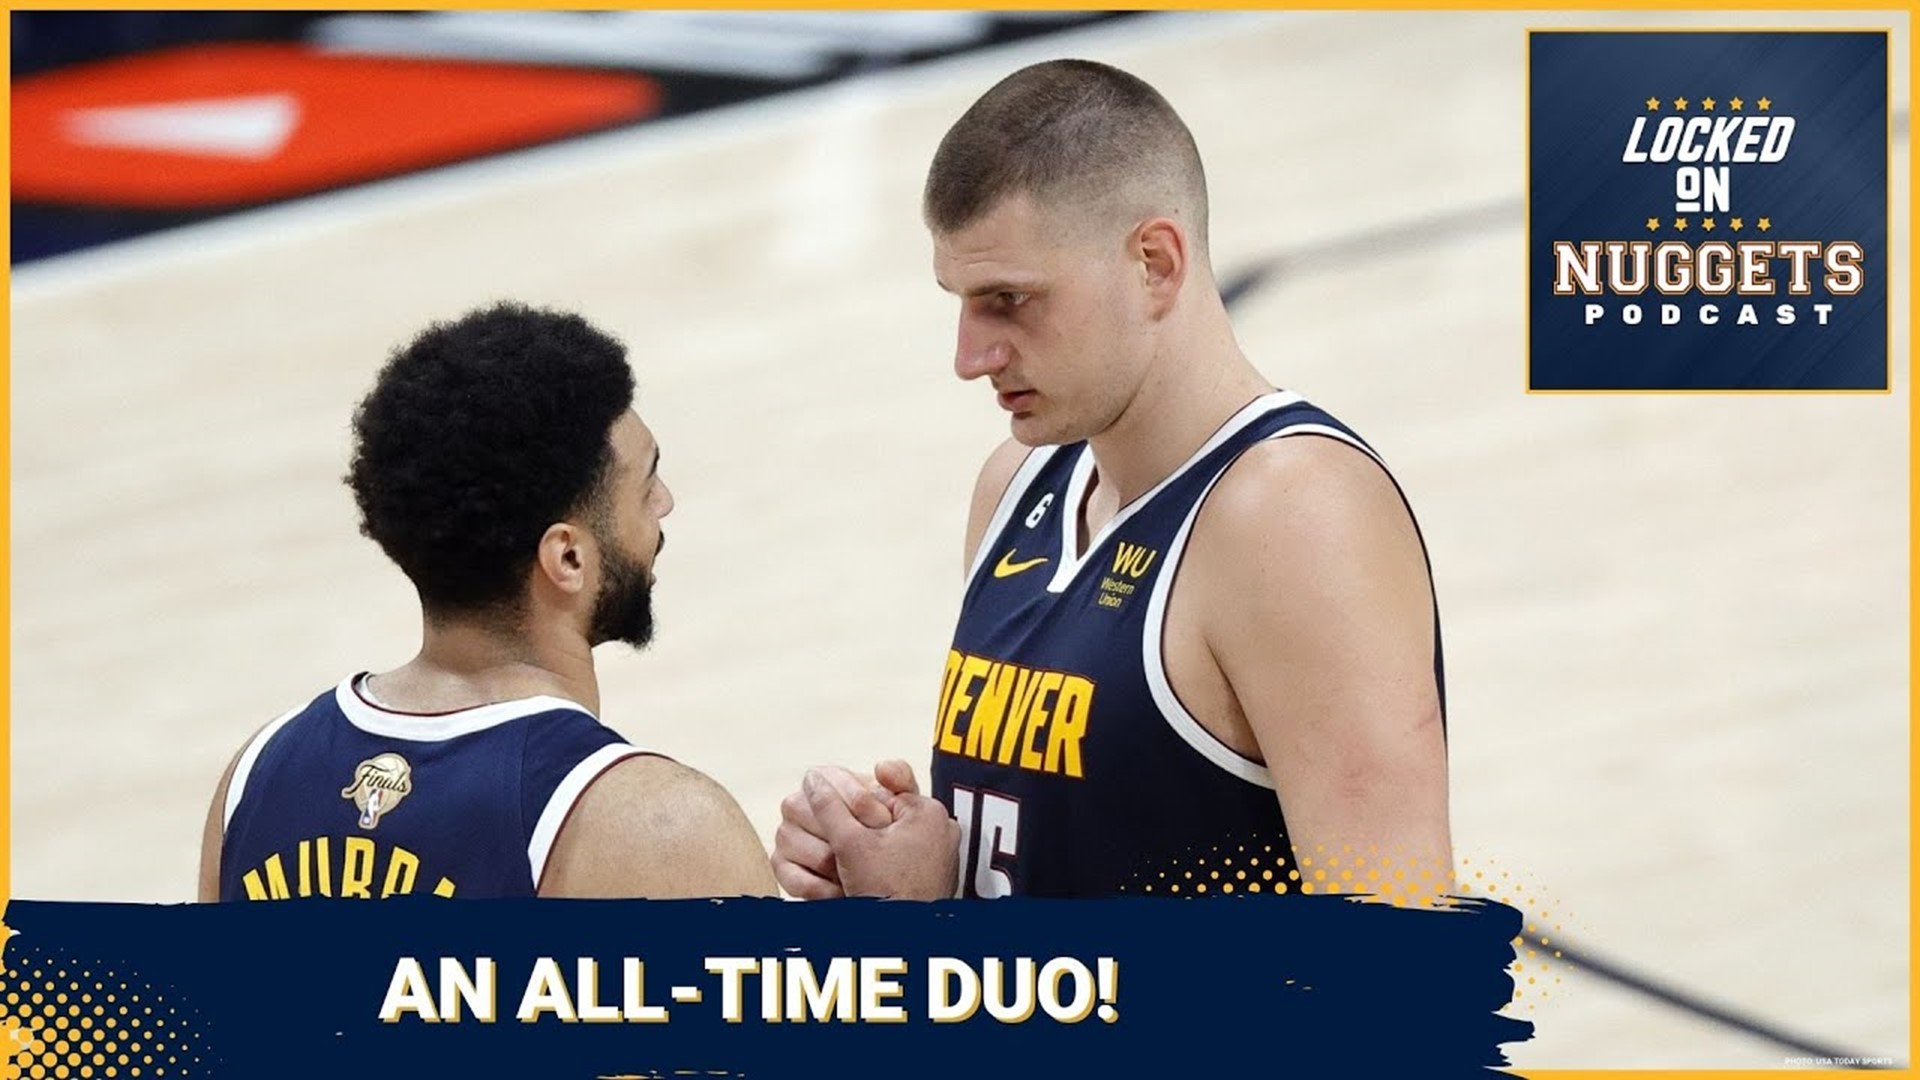 The Nuggets secure their biggest win in franchise history (been a lot of those lately), behind one of the greatest duo performances in NBA history.